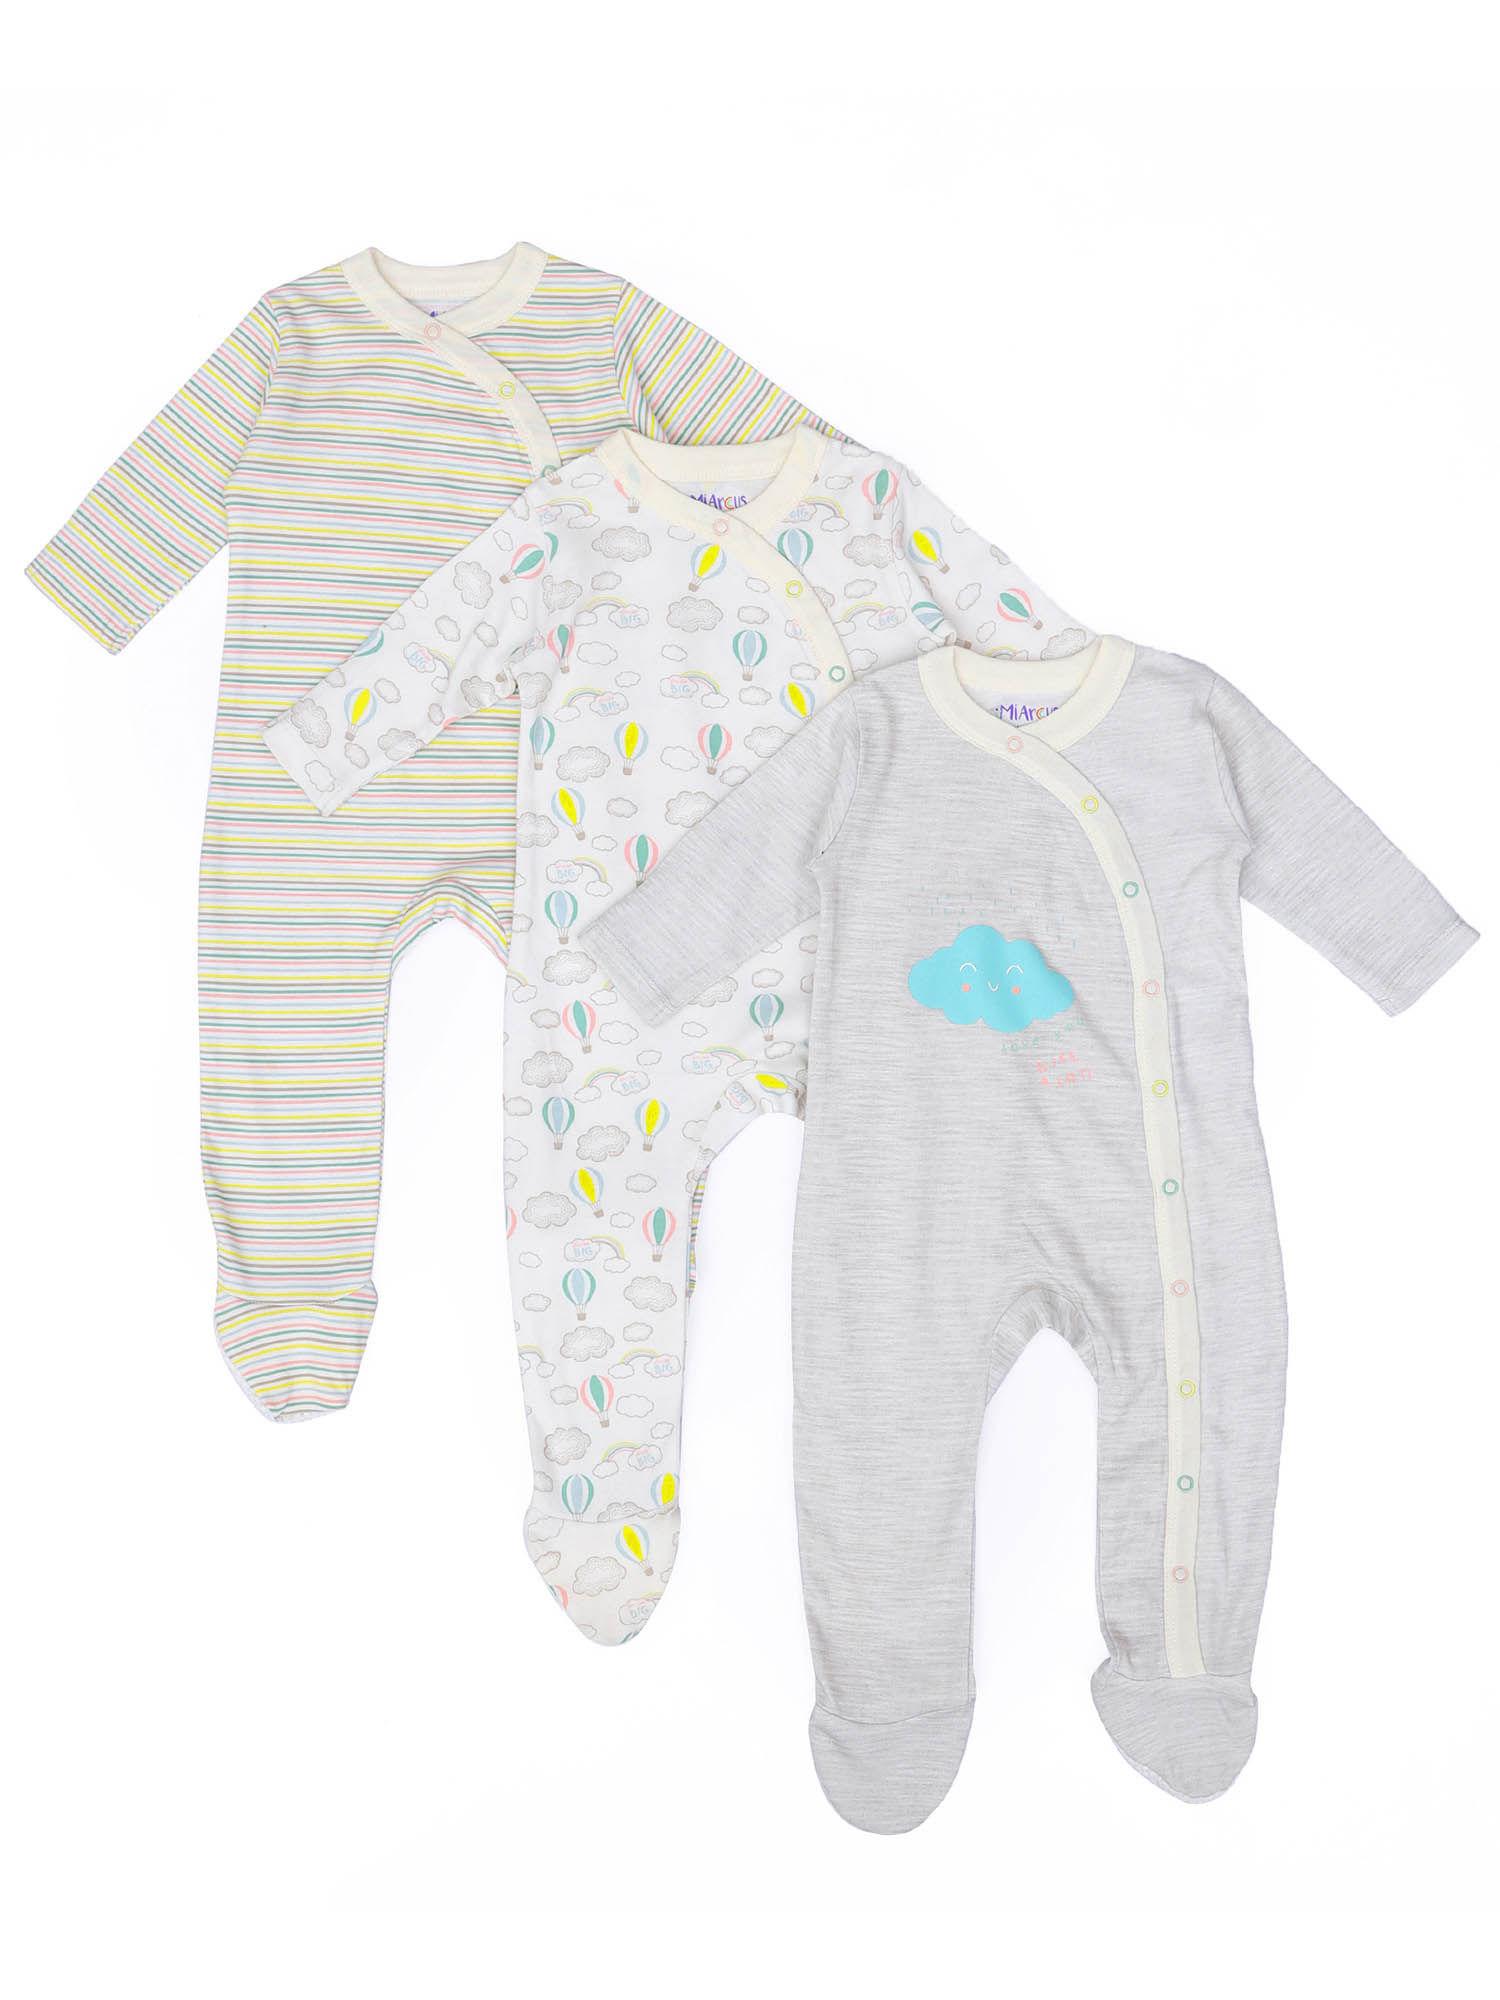 Unisex Comfy Knitted Sleep Suit - Arcus (Pack of 3)